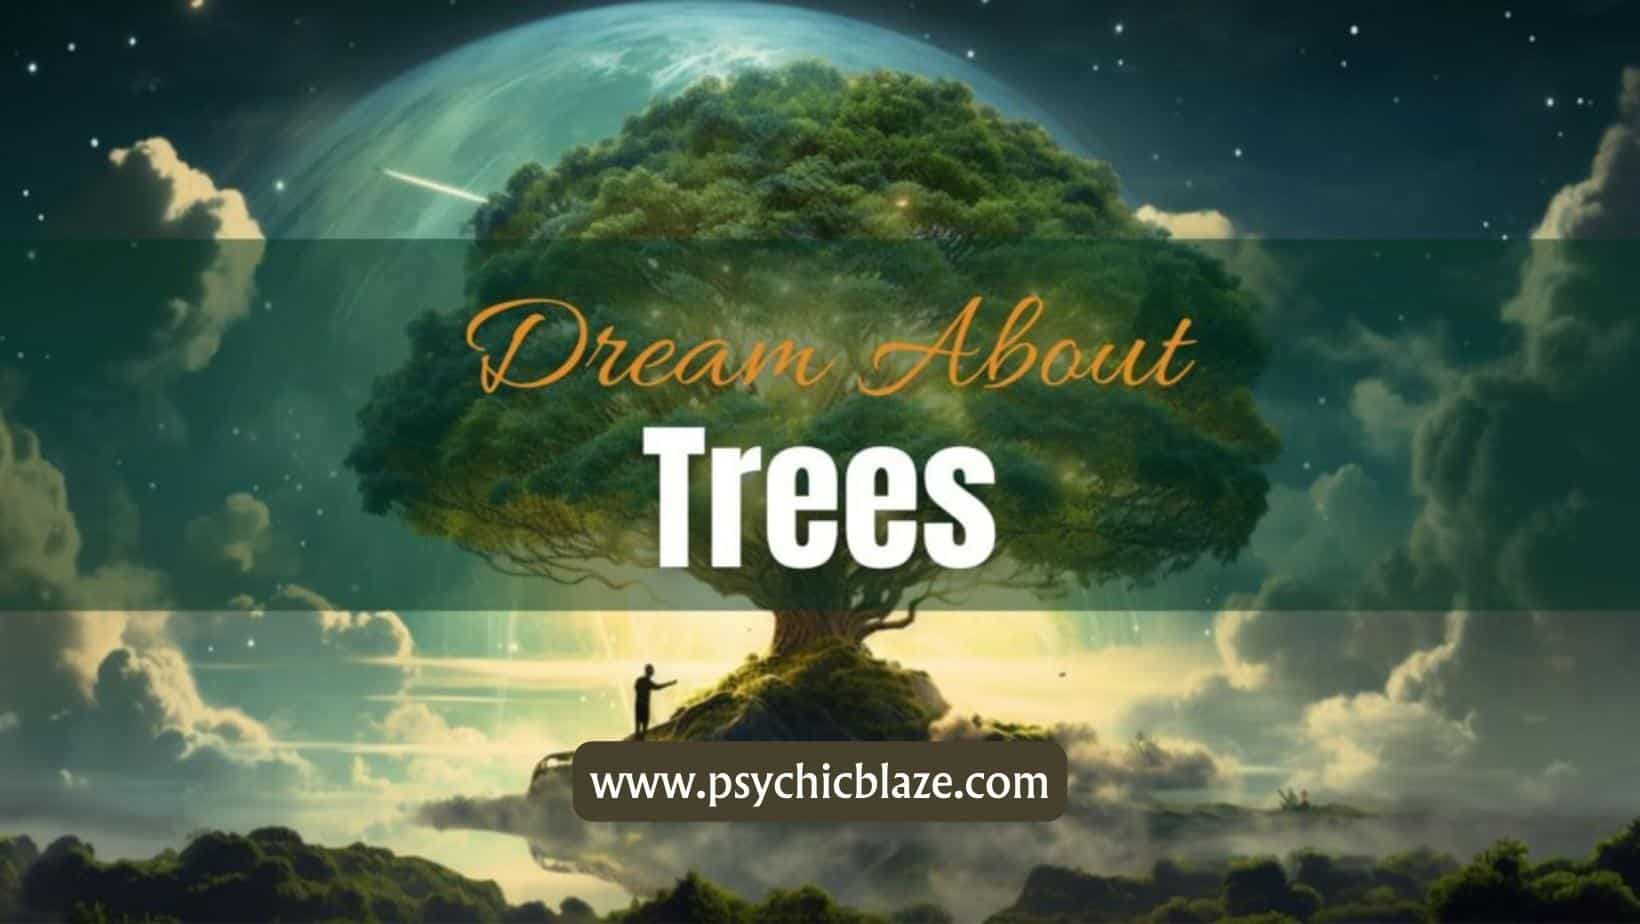 Dream about Trees